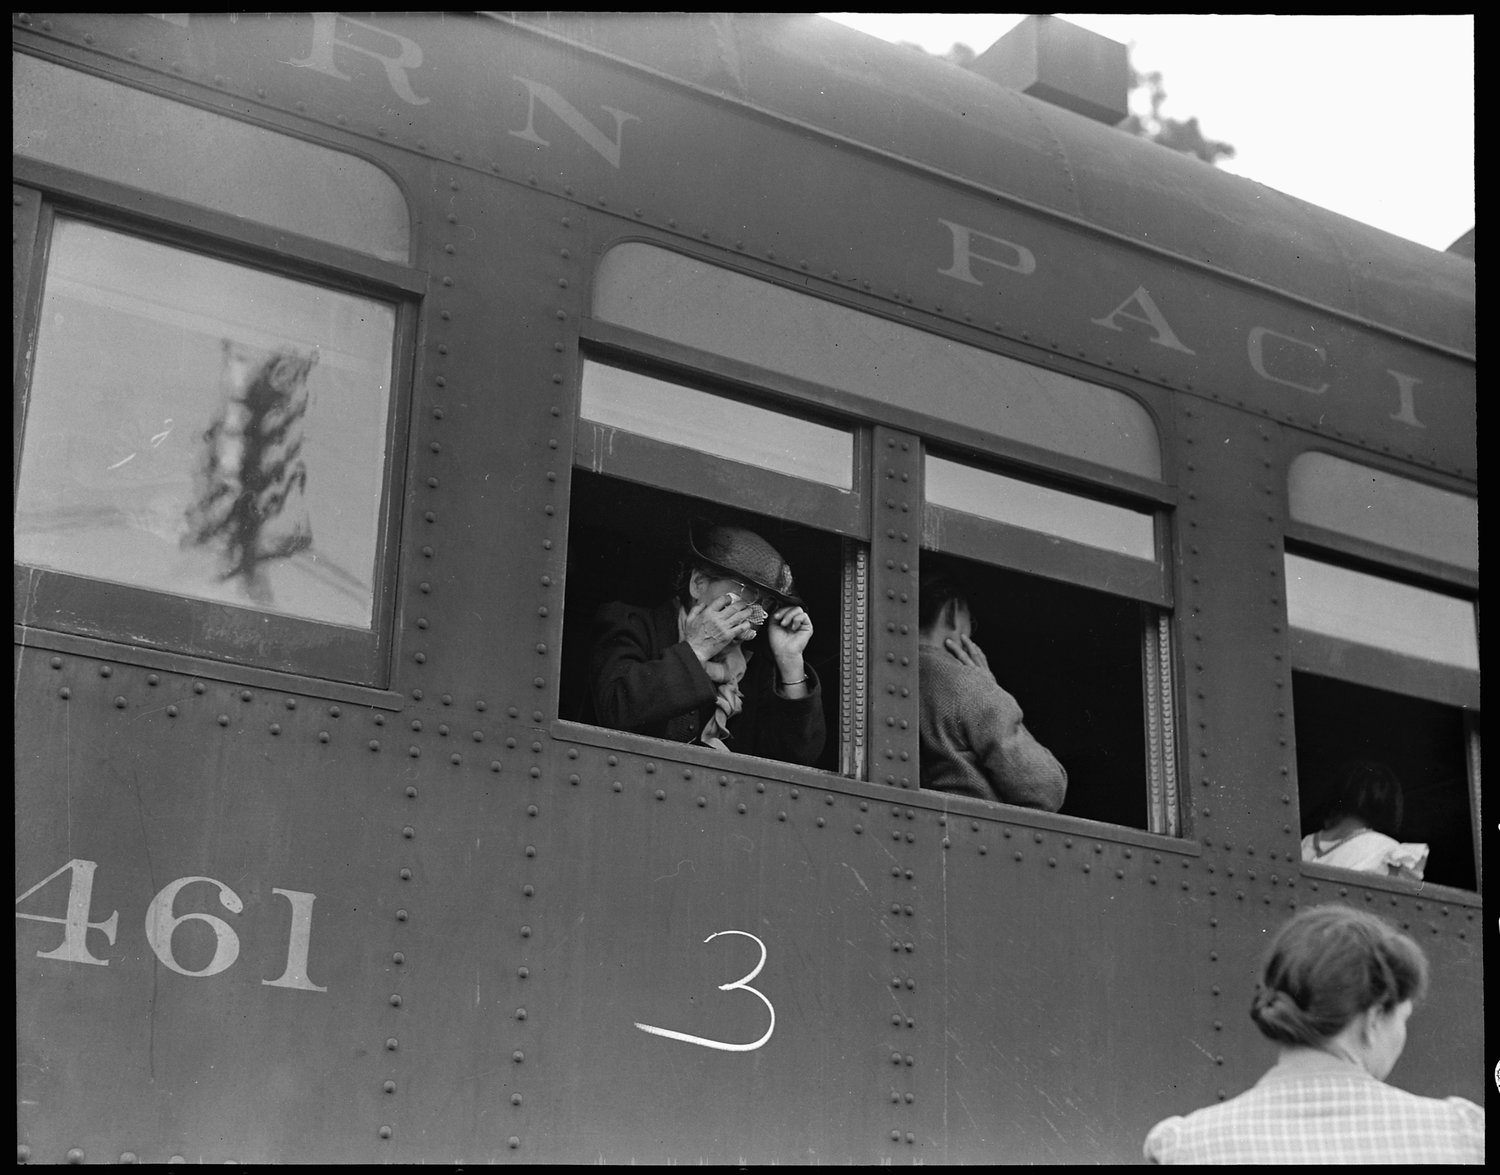 Woodland, Yolo County, California. Ten cars of evacuees of Japanese ancestry are now aboard and the doors are closed. Their Caucasian friends and the staff of the Wartime Civil Control Administration stations are watching the departure from the platform. Evacuees are leaving their homes and ranches, in a rich agricultural district, bound for Merced Assembly Center about 125 miles away.